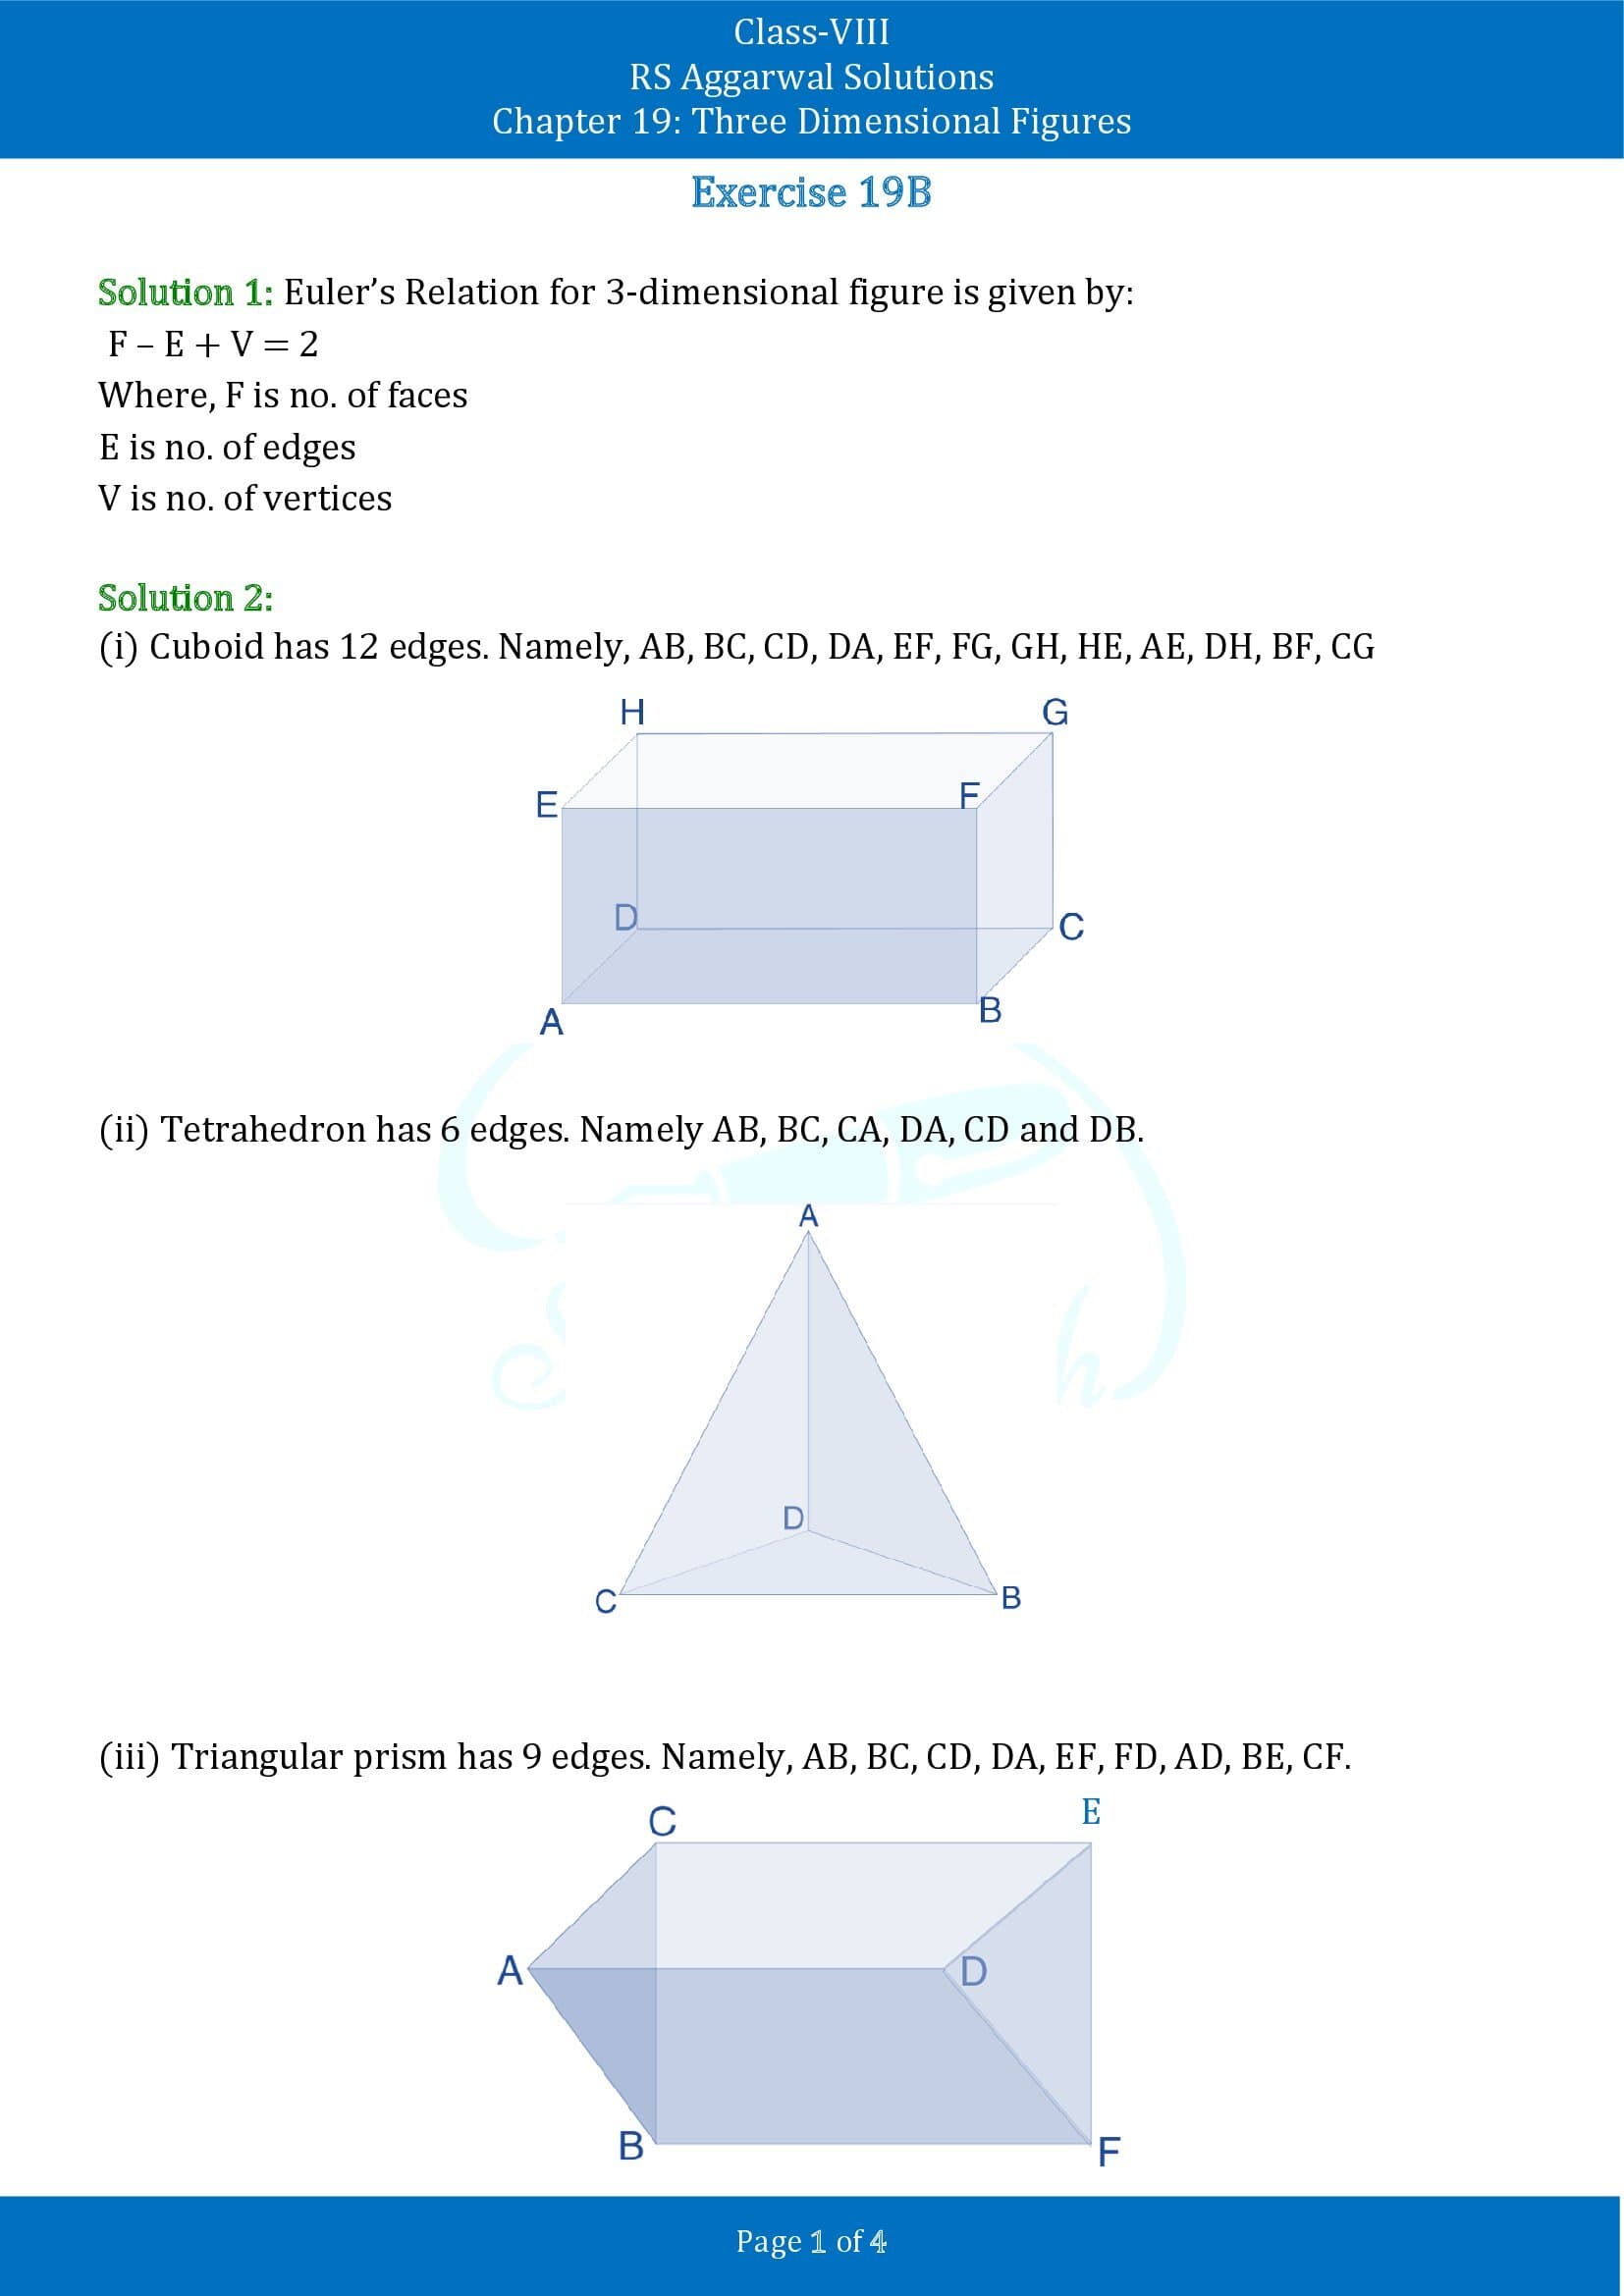 RS Aggarwal Solutions Class 8 Chapter 19 Three Dimensional Figures Exercise 19B 00001